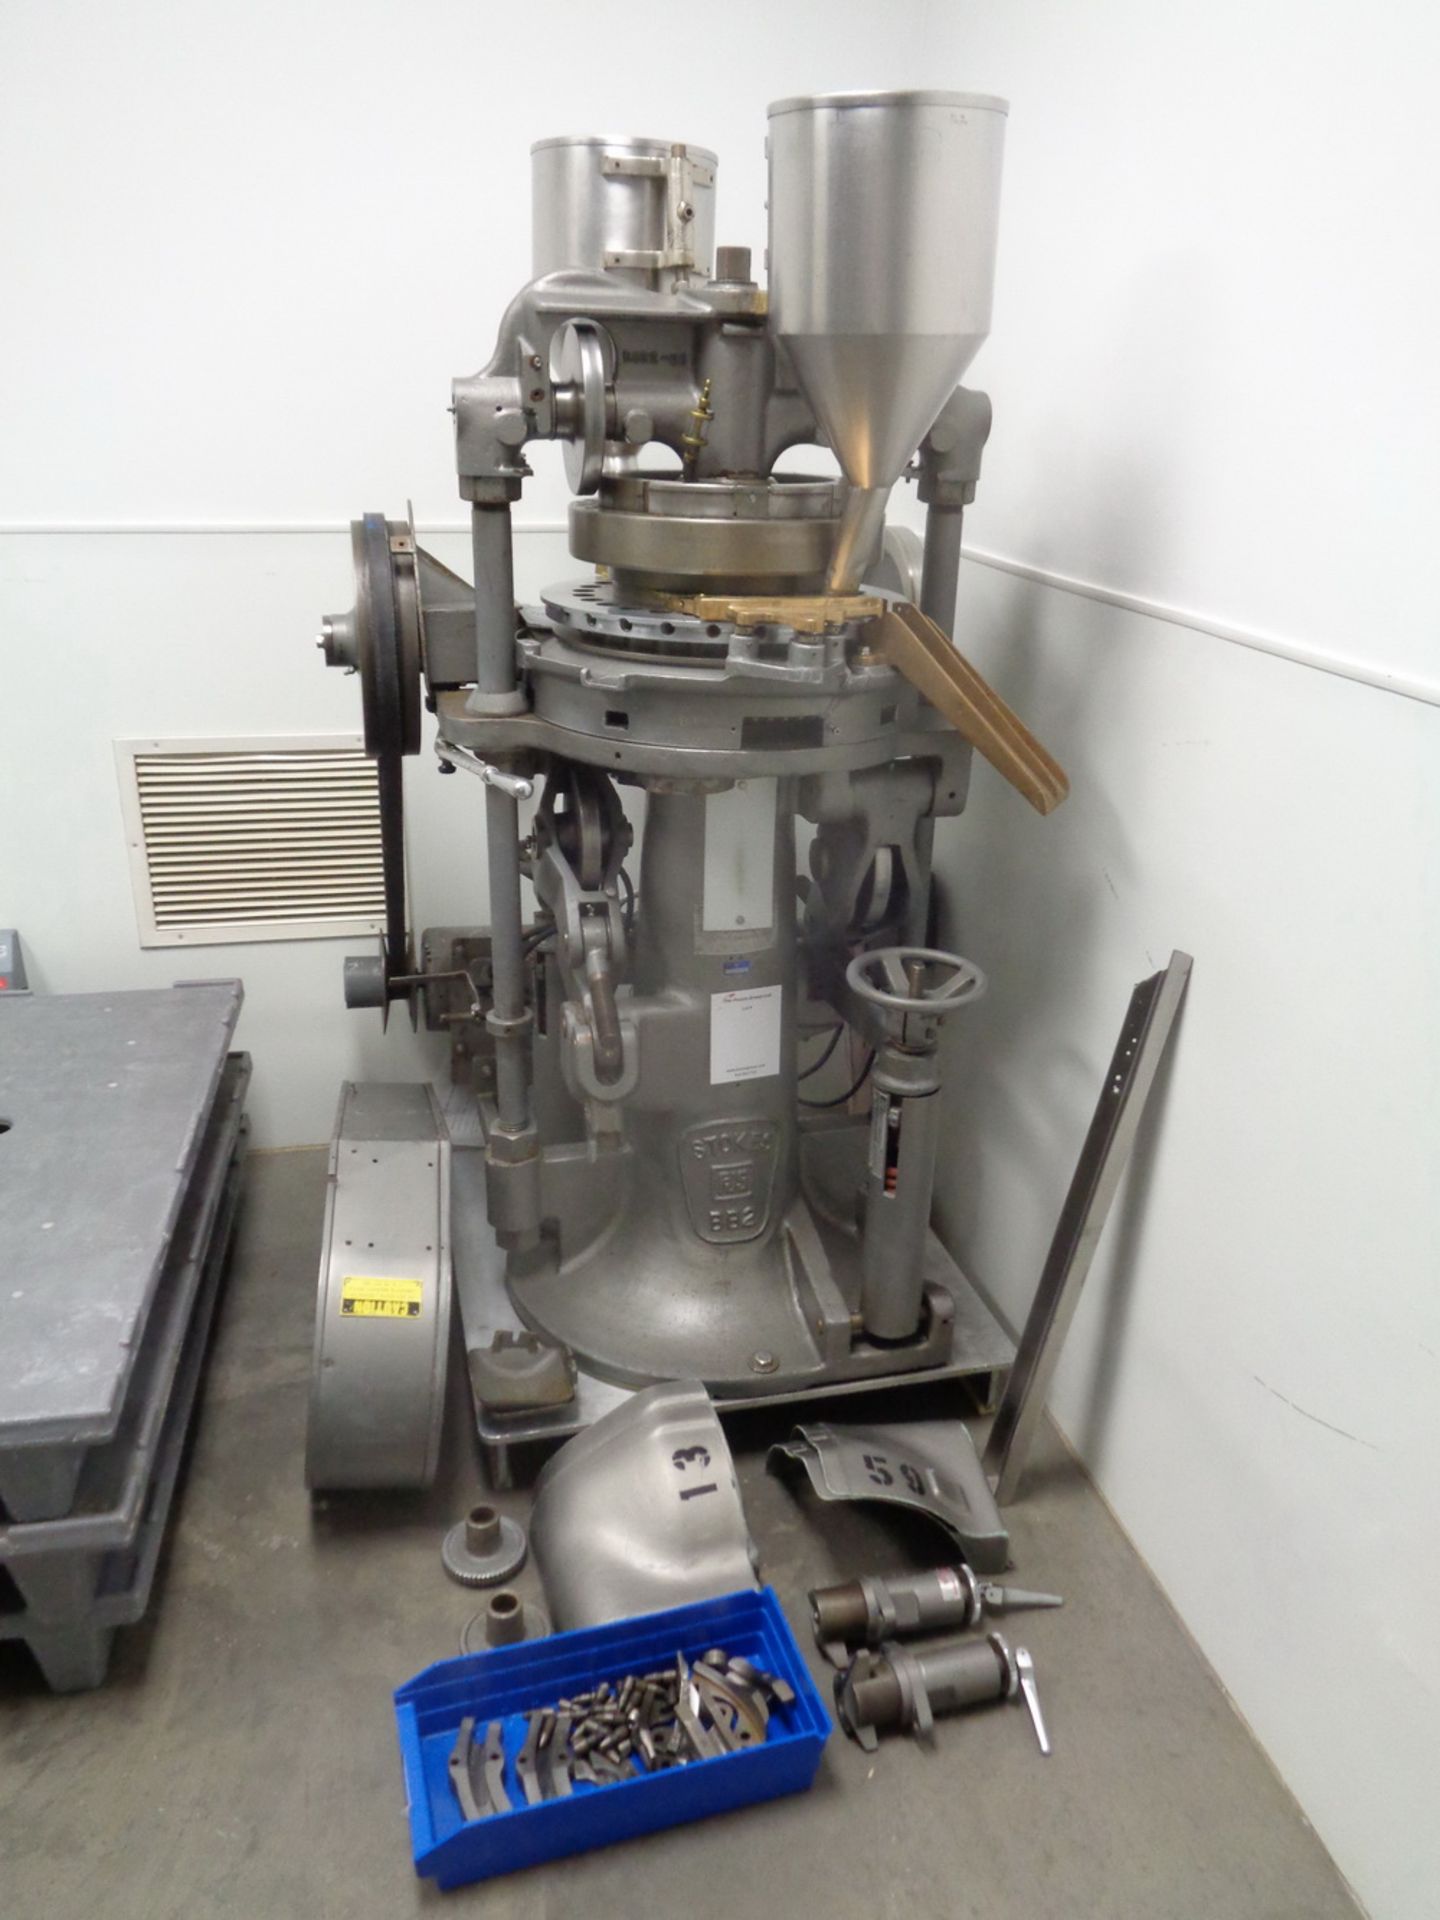 STOKES DOUBLE SIDED ROTARY TABLET PRESS, MODEL BB2, SERIAL NUMBER T-38314. WITH 27 STATION TURRET, B